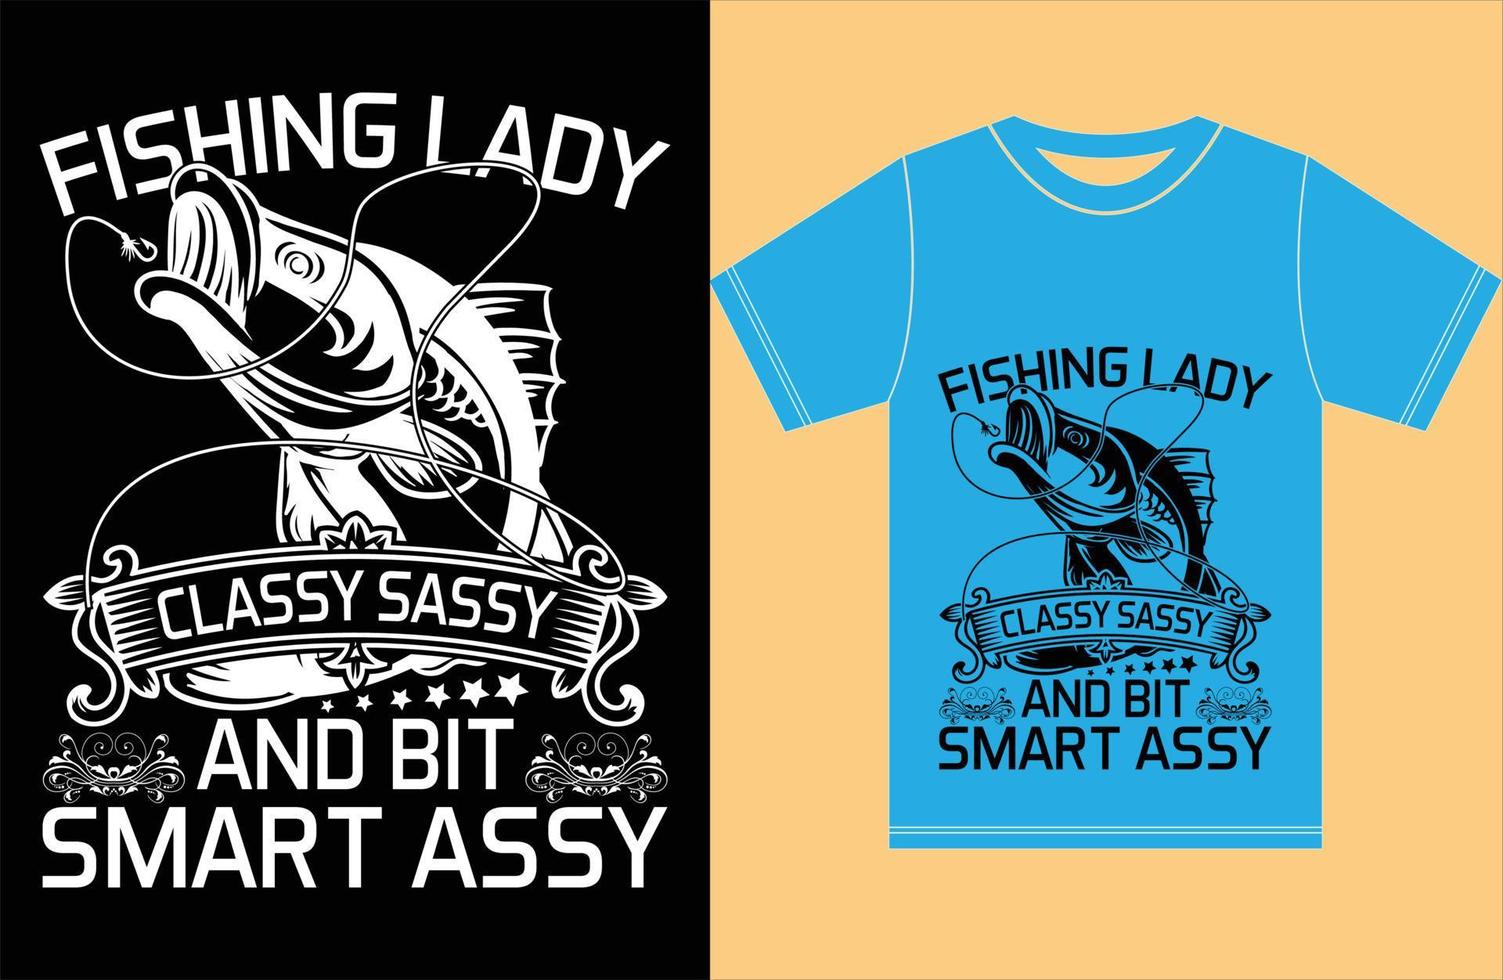 https://static.vecteezy.com/system/resources/previews/006/115/643/non_2x/fishing-lady-classy-sassy-and-bit-smart-assy-fishing-lady-t-shirt-vector.jpg